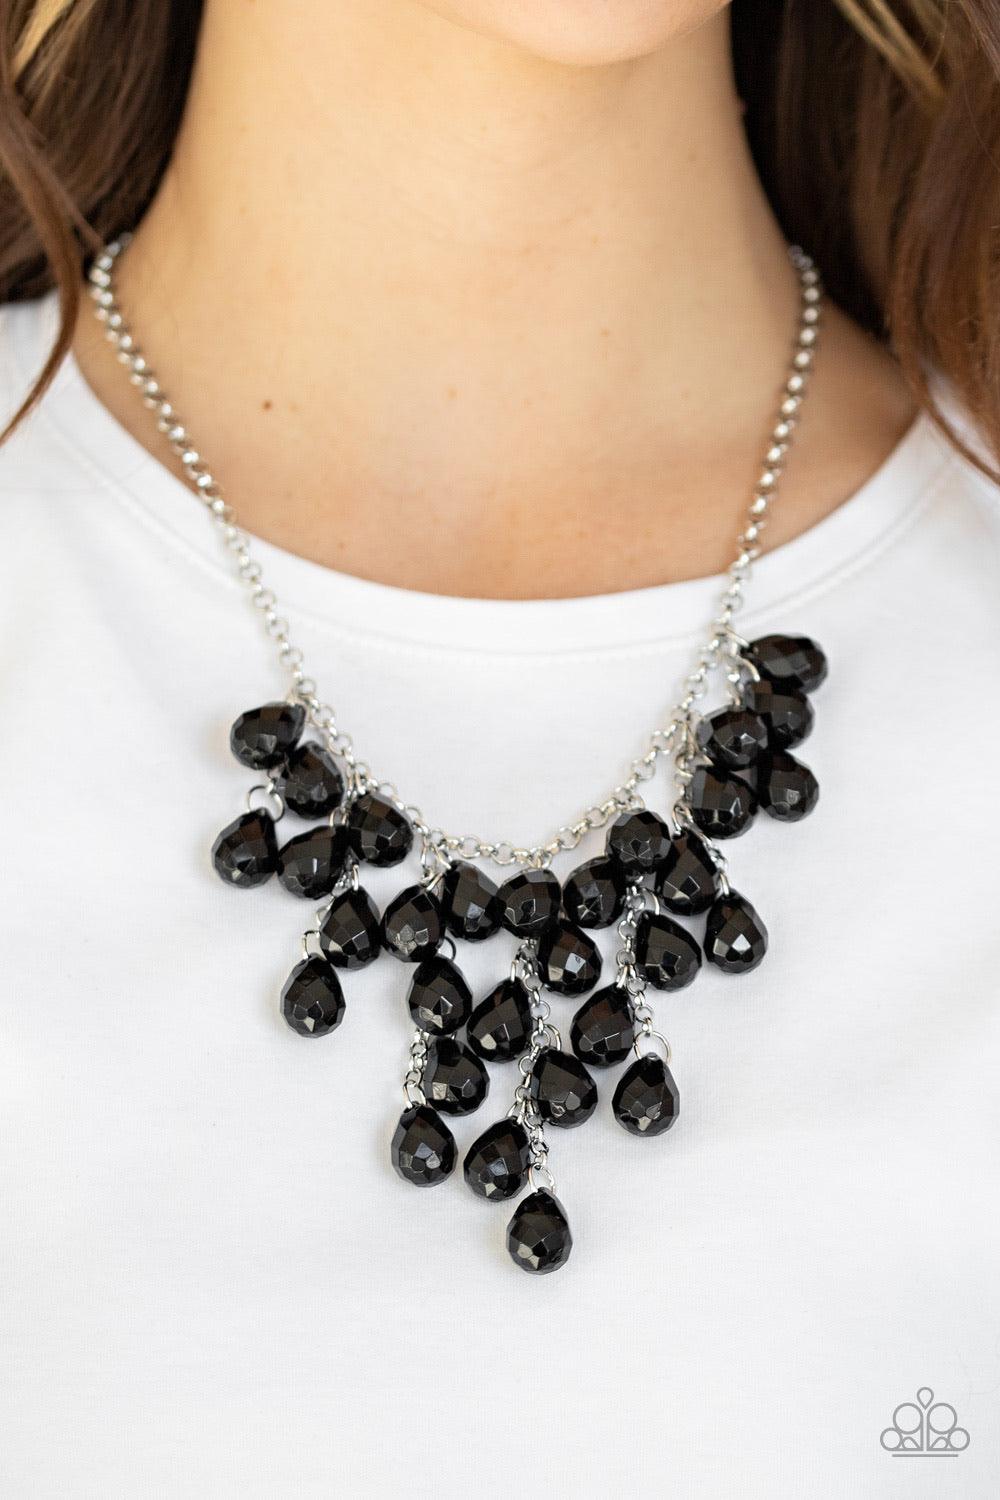 Paparazzi Accessories Serenely Scattered - Black Strands of faceted black teardrops cascade from the bottom of a shimmery silver chain, creating a scattered fringe below the collar. Features an adjustable clasp closure. Sold as one individual necklace. In